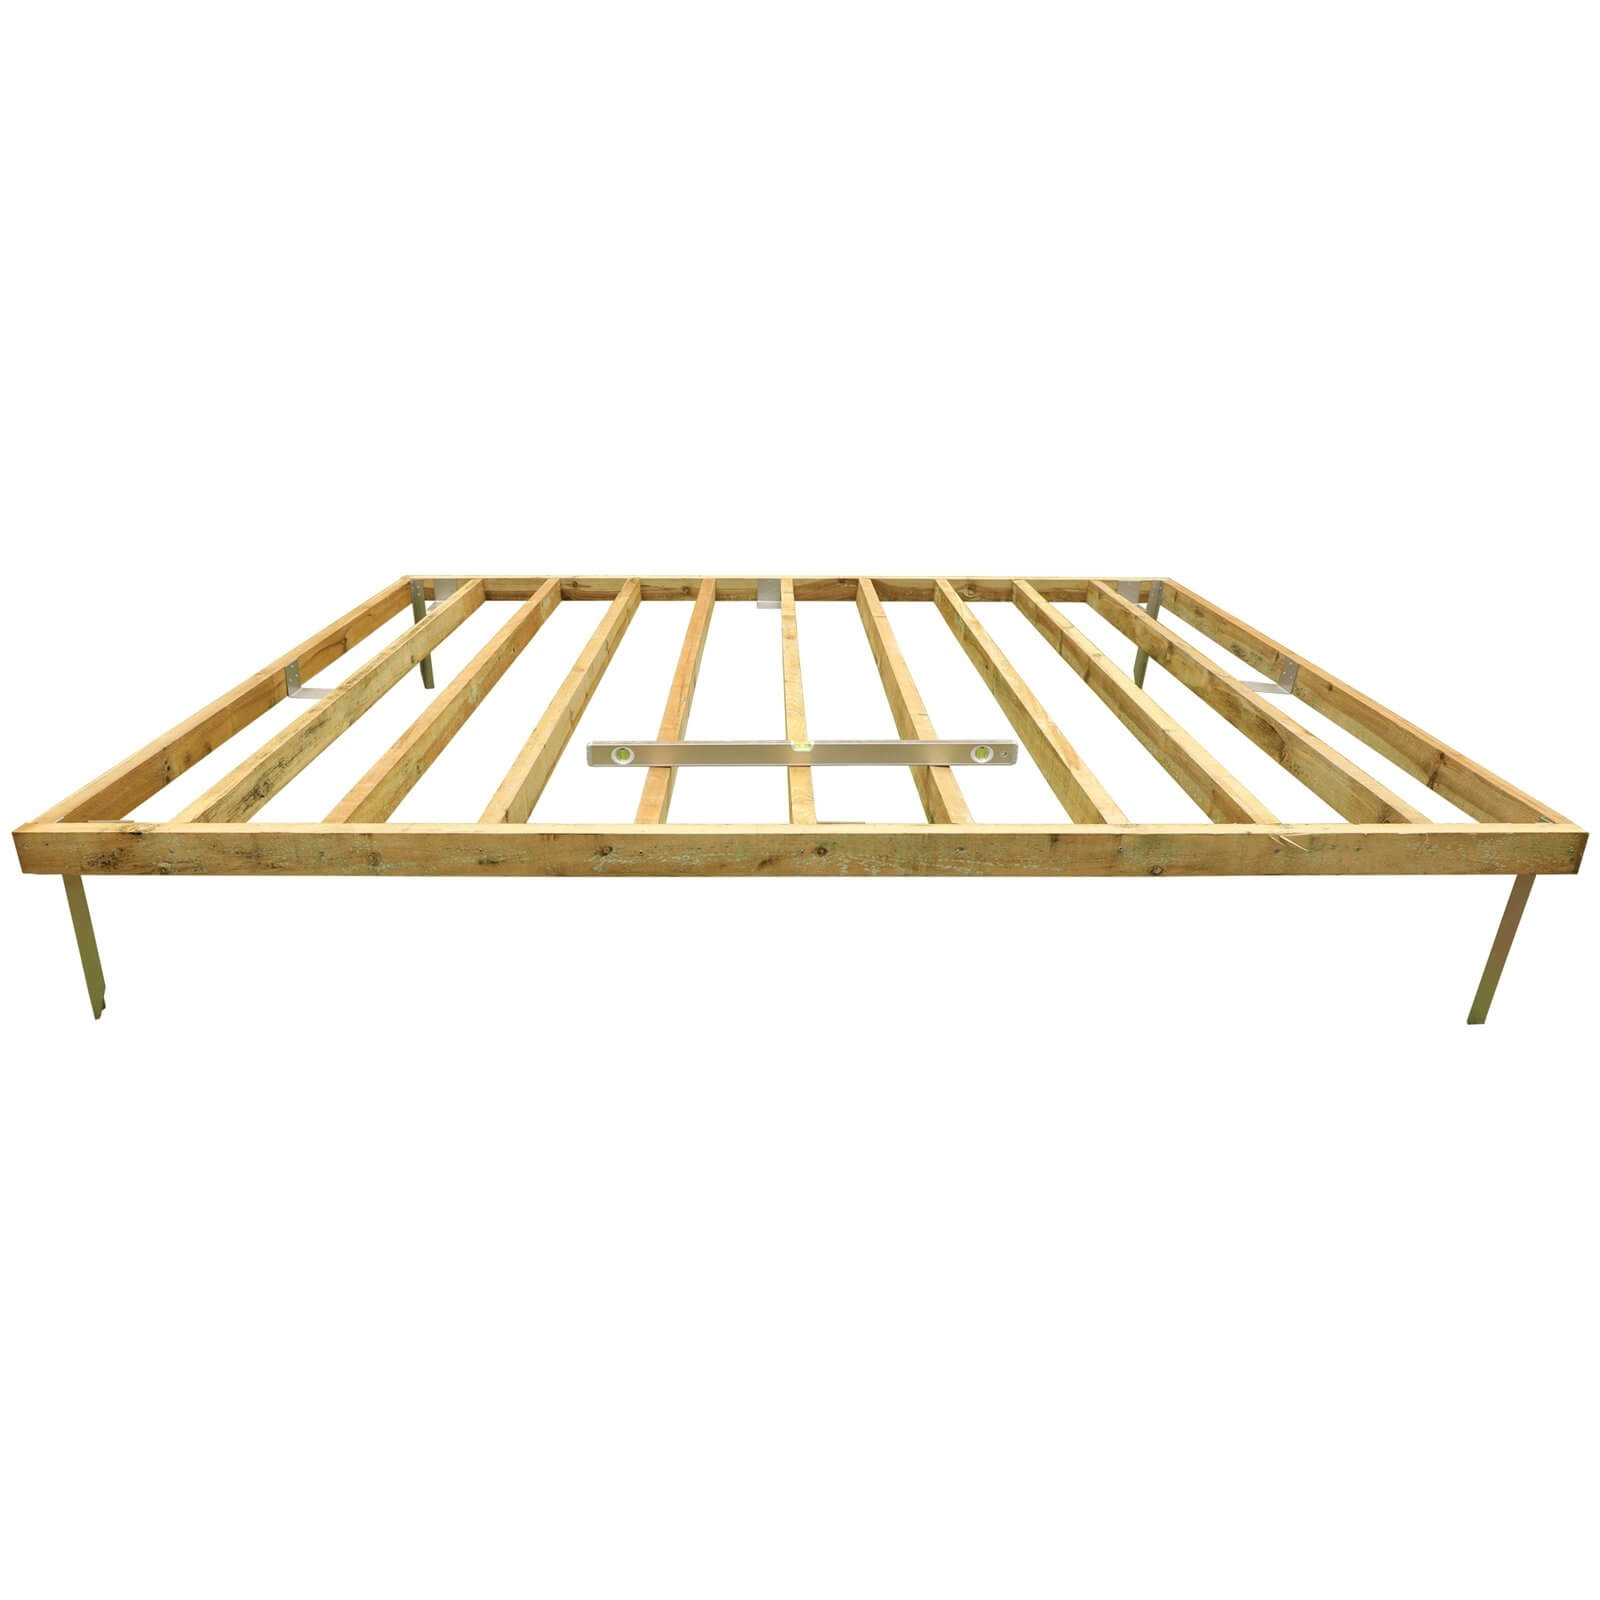 Mercia 10x8ft Pressure Treated Wooden Shed Base